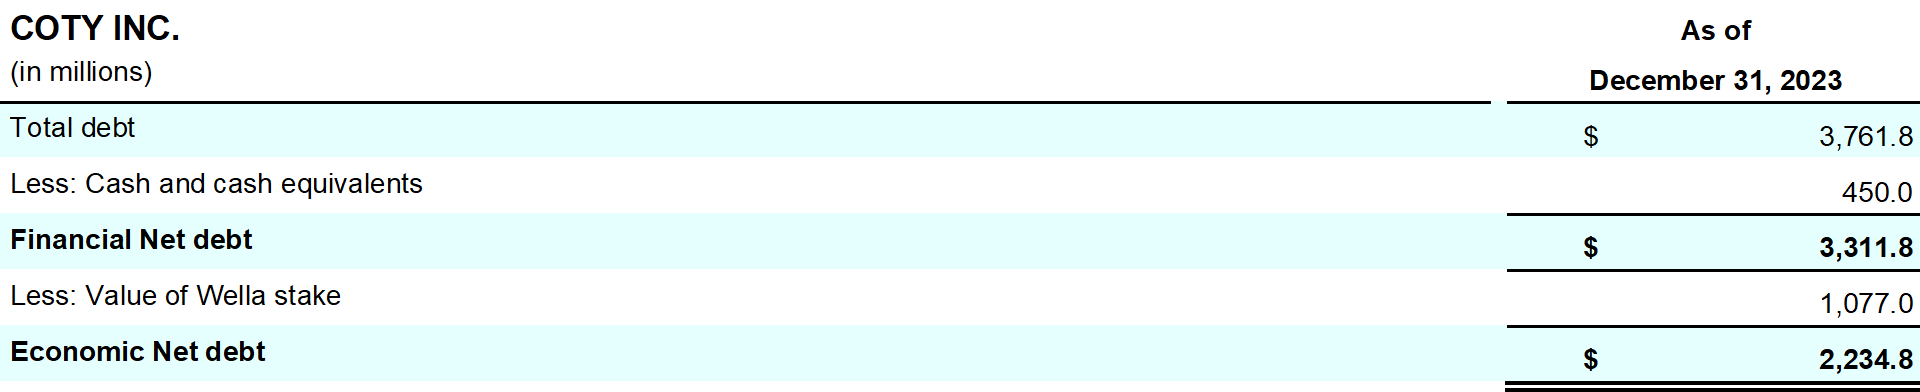 Coty-Earnings-release-Q2-1H24-table_16.png